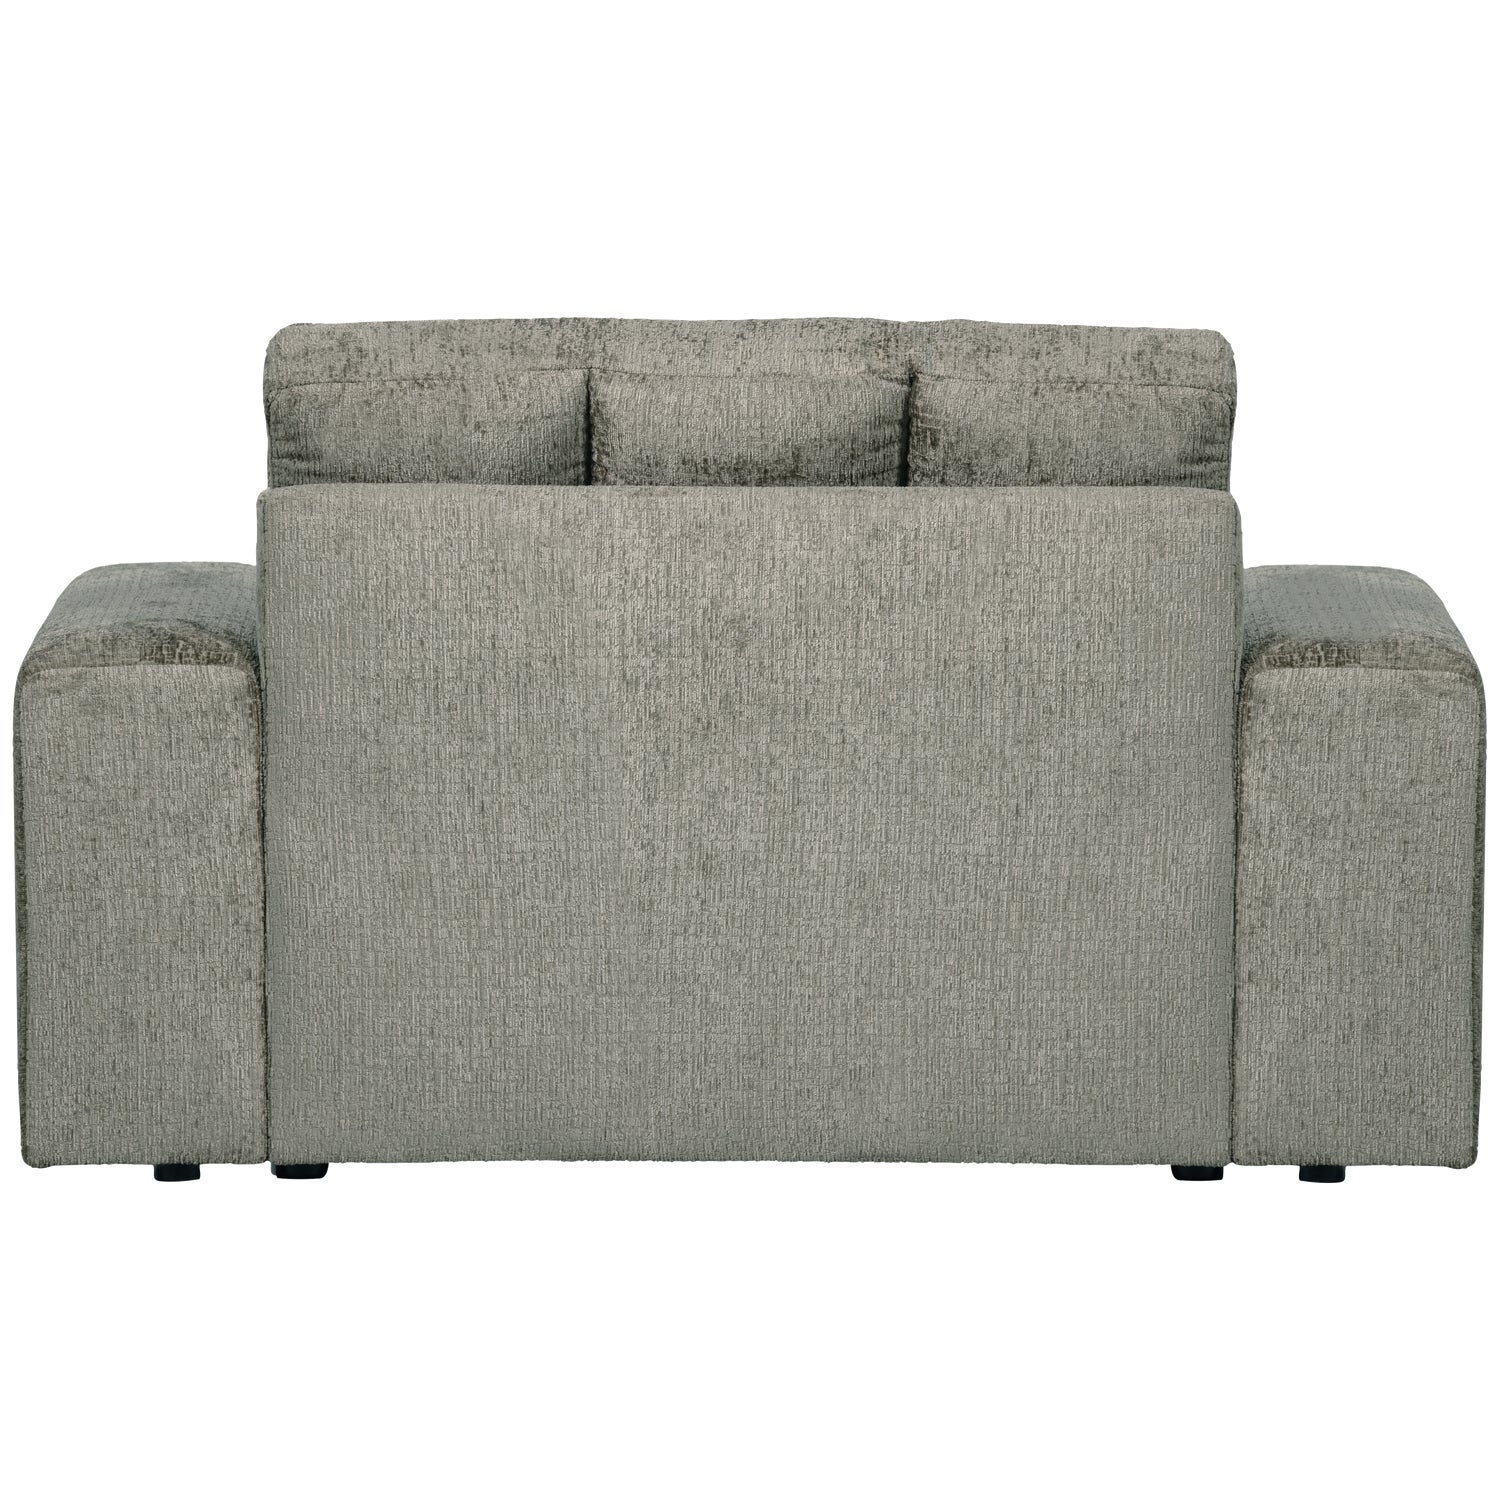 379006-FR-02_VS_WE_second_date_loveseat_structure_velvet_frost_AK1.png?auto=webp&format=png&width=1500&height=1500